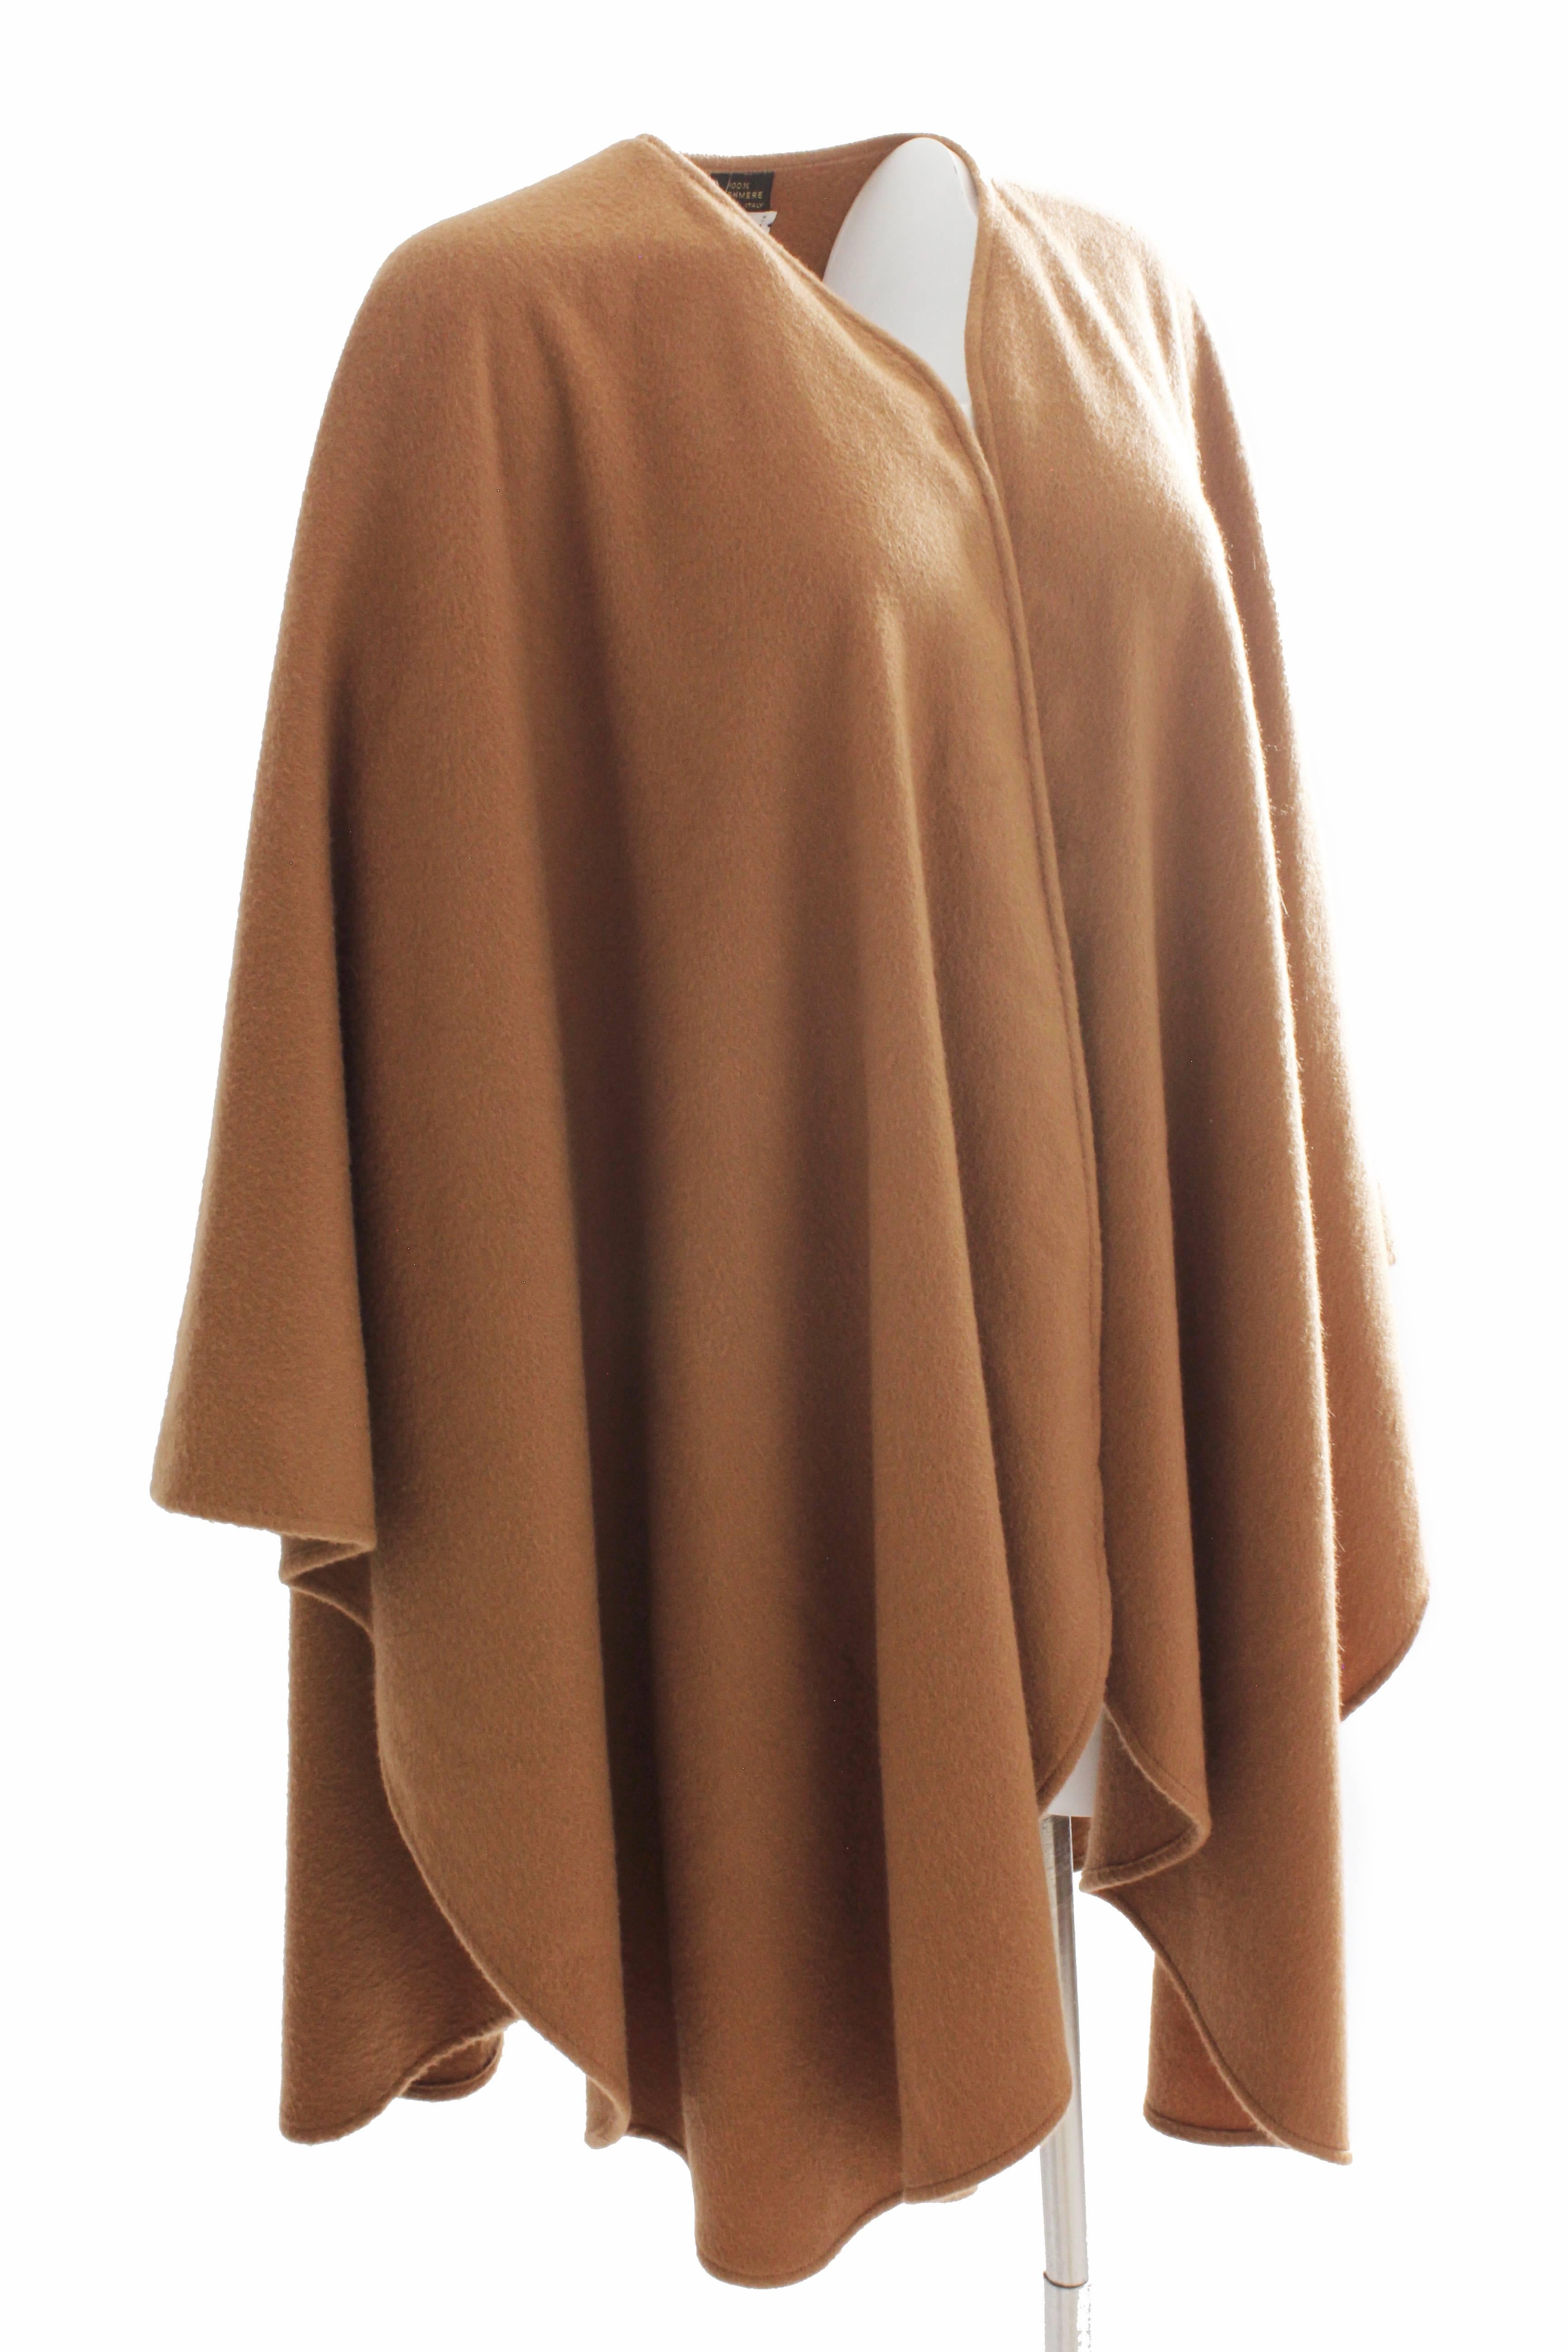 This chic cape or poncho was made by Yves Saint Laurent for the winter 1996/1997 collection.  Made from camel tan cashmere, this piece is elegantly simple and can be styled in so many ways.  Preowned with minimal signs of prior wear.  Unlined.  One